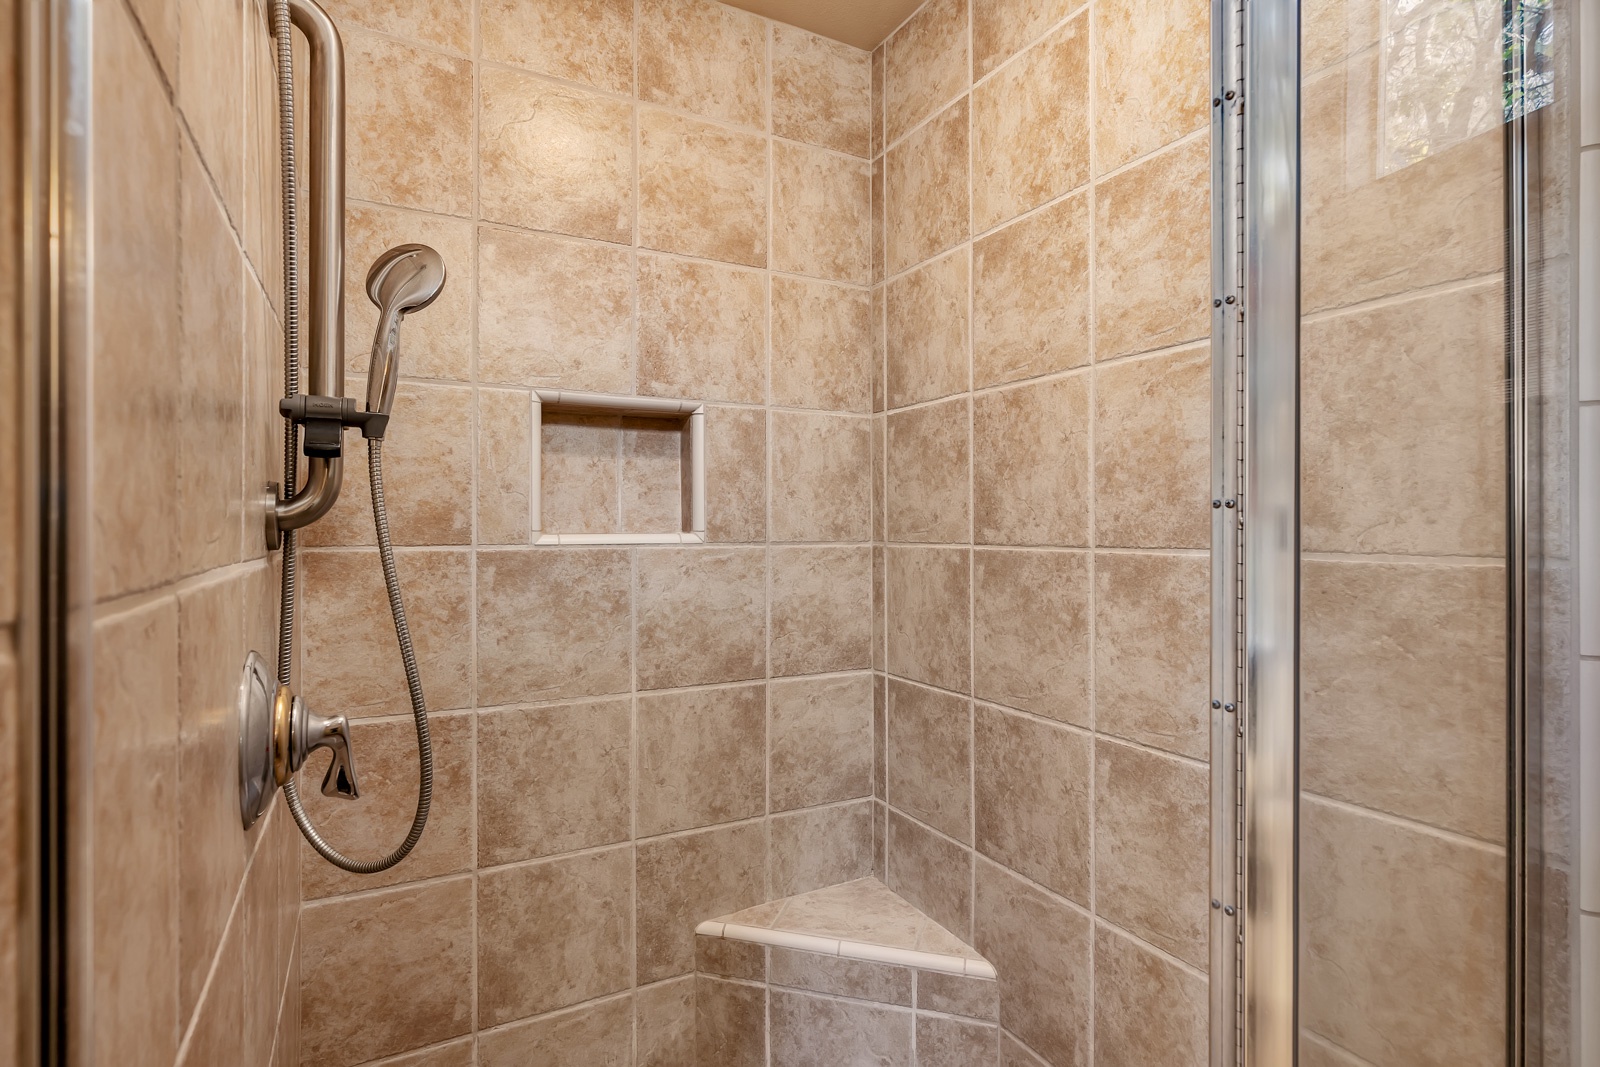 The king en suite boasts a double vanity, walk-in shower, & jetted soaking tub